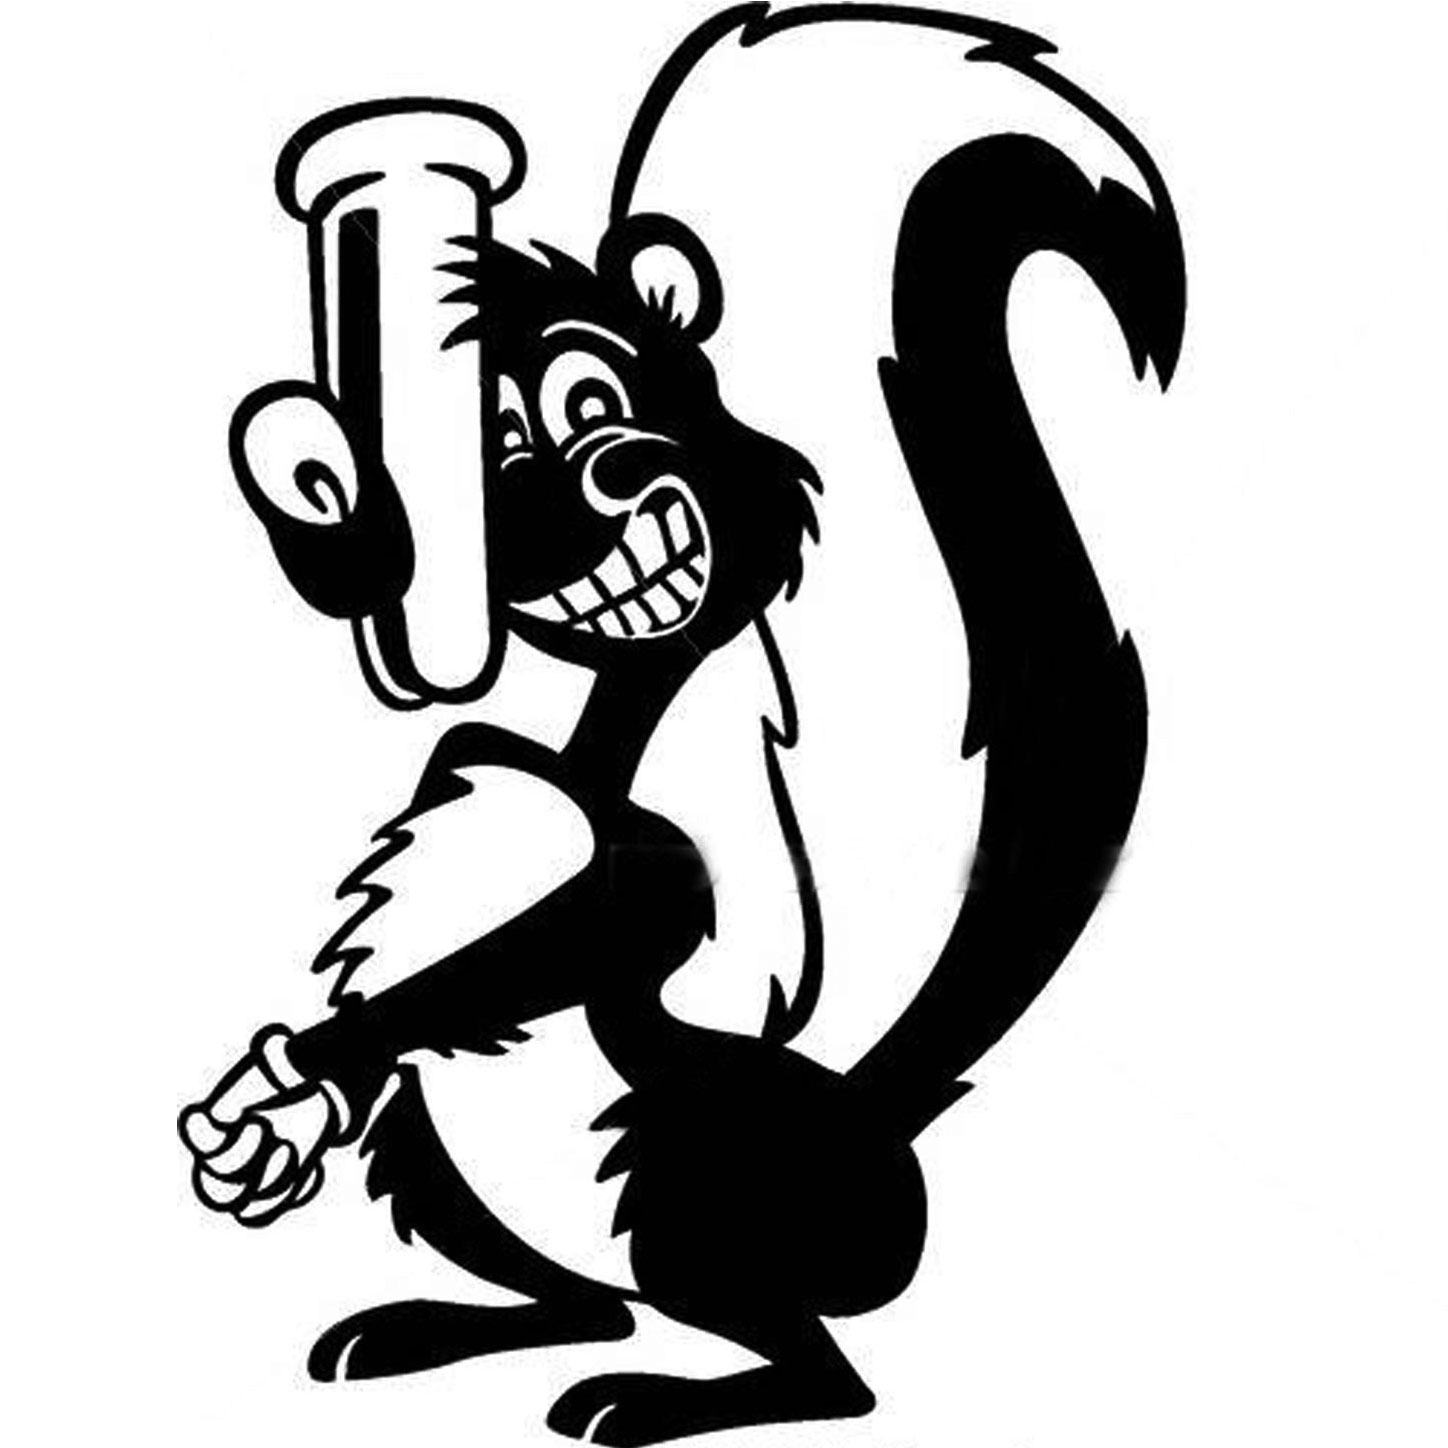 Colossal skunk pictures free. Awesome clipart wonderful